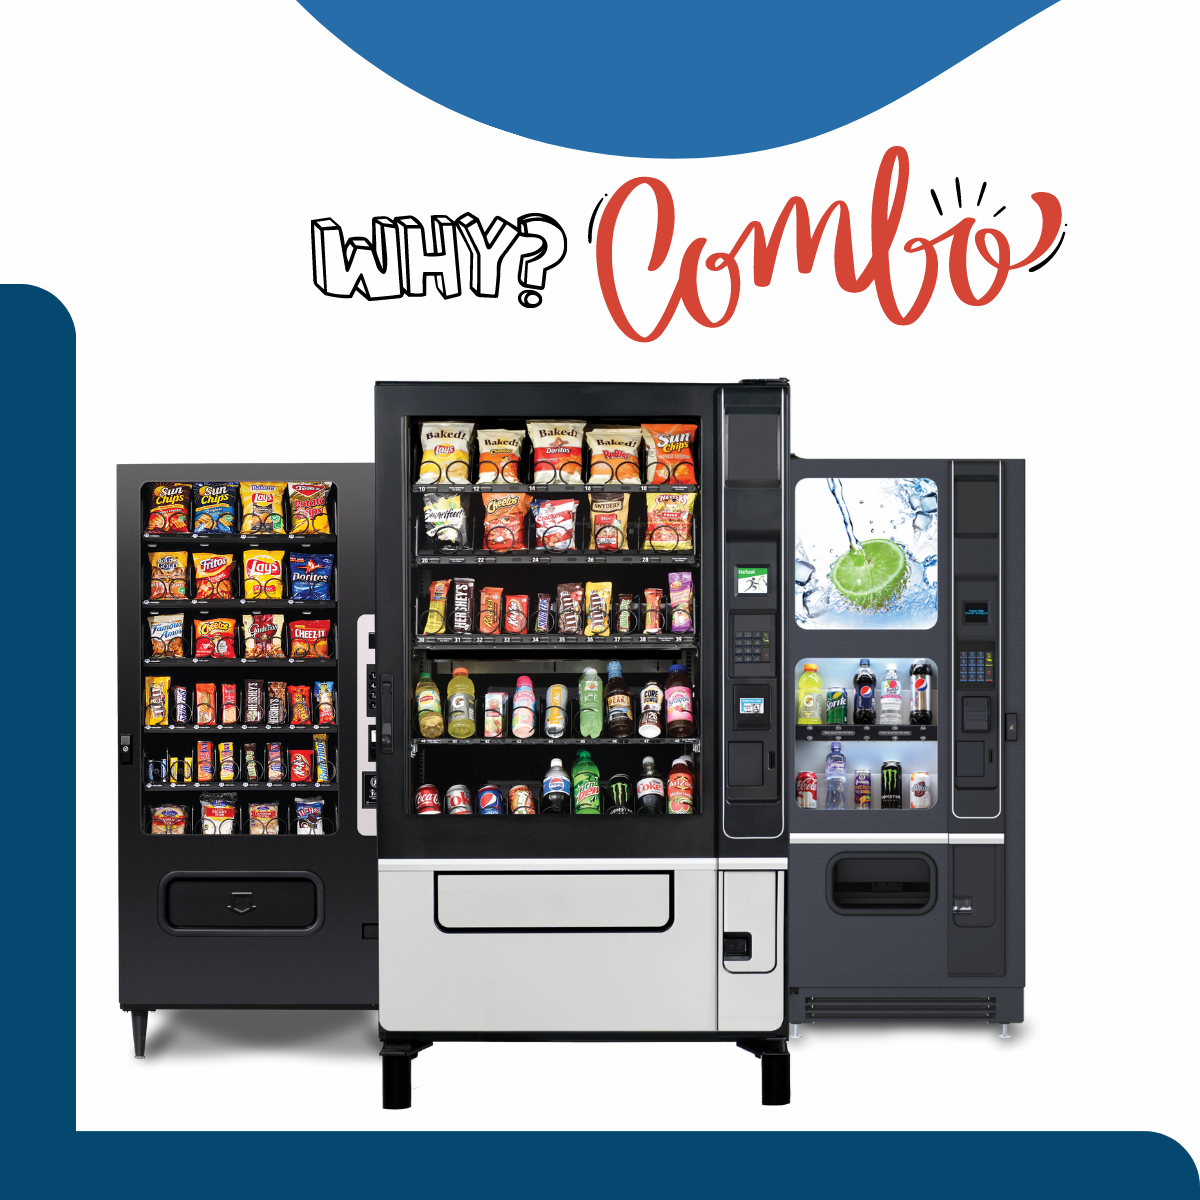 WHY CONSIDER A COMBO VENDING MACHINE?